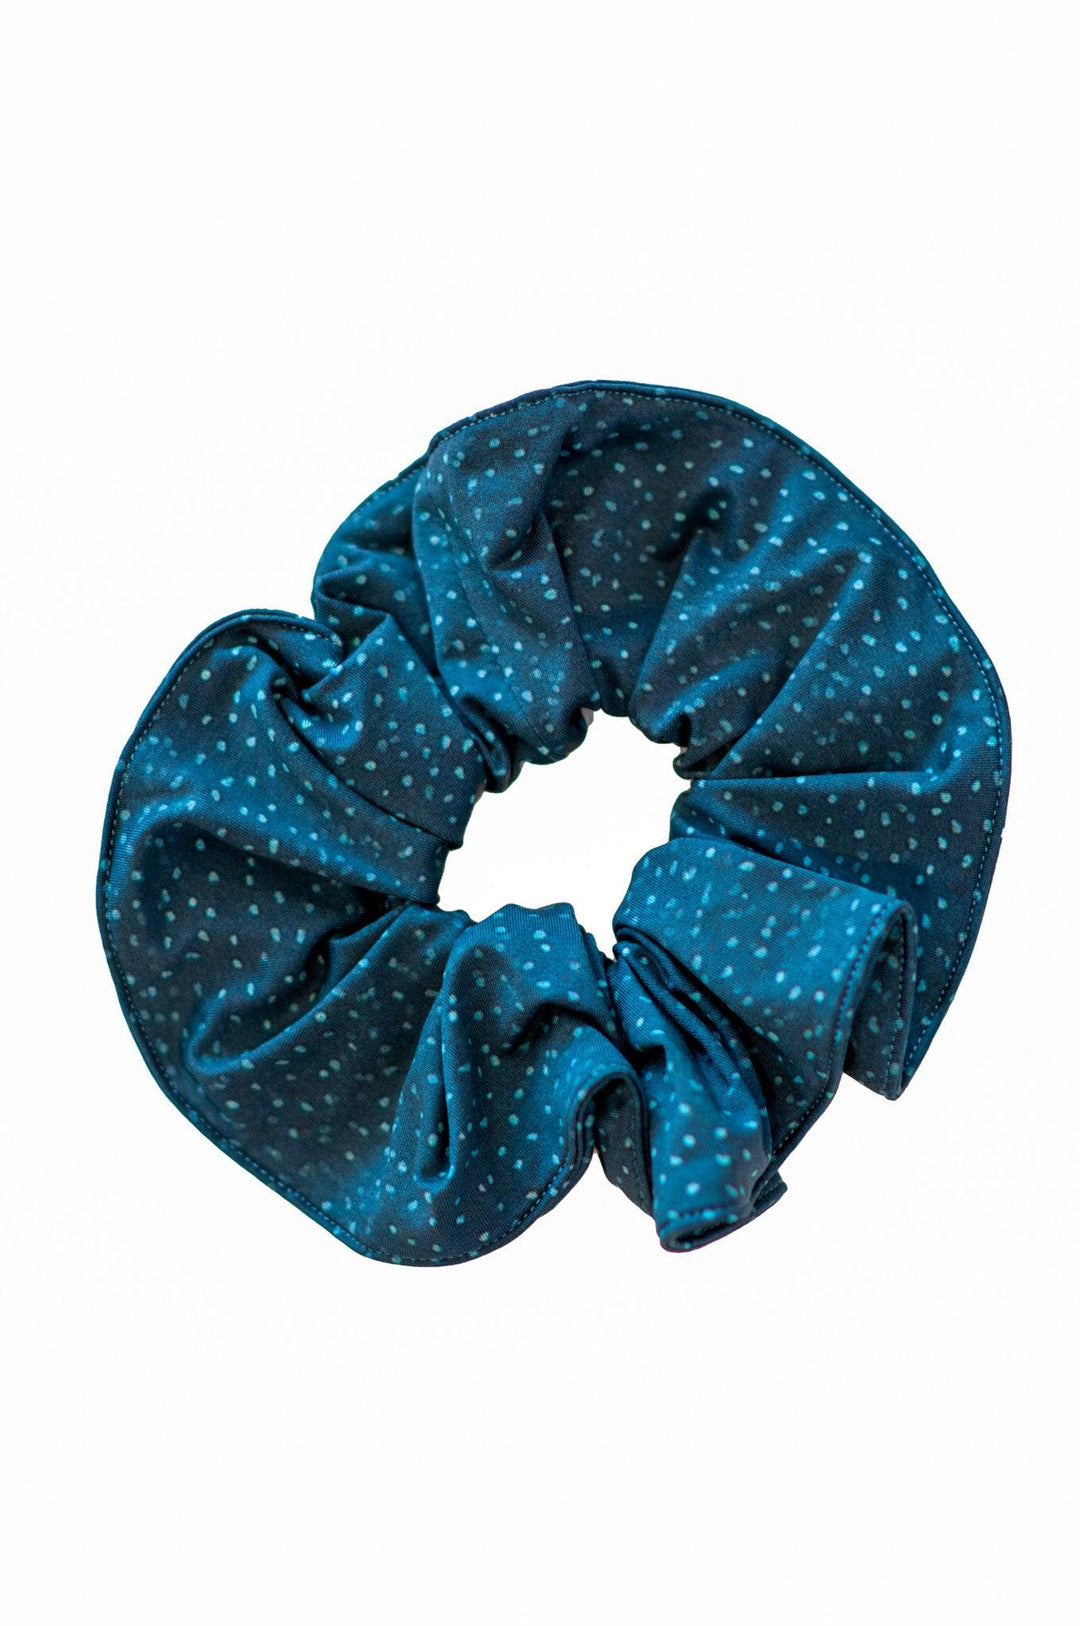 UPCYCLED SCRUNCHIES - Party of three!